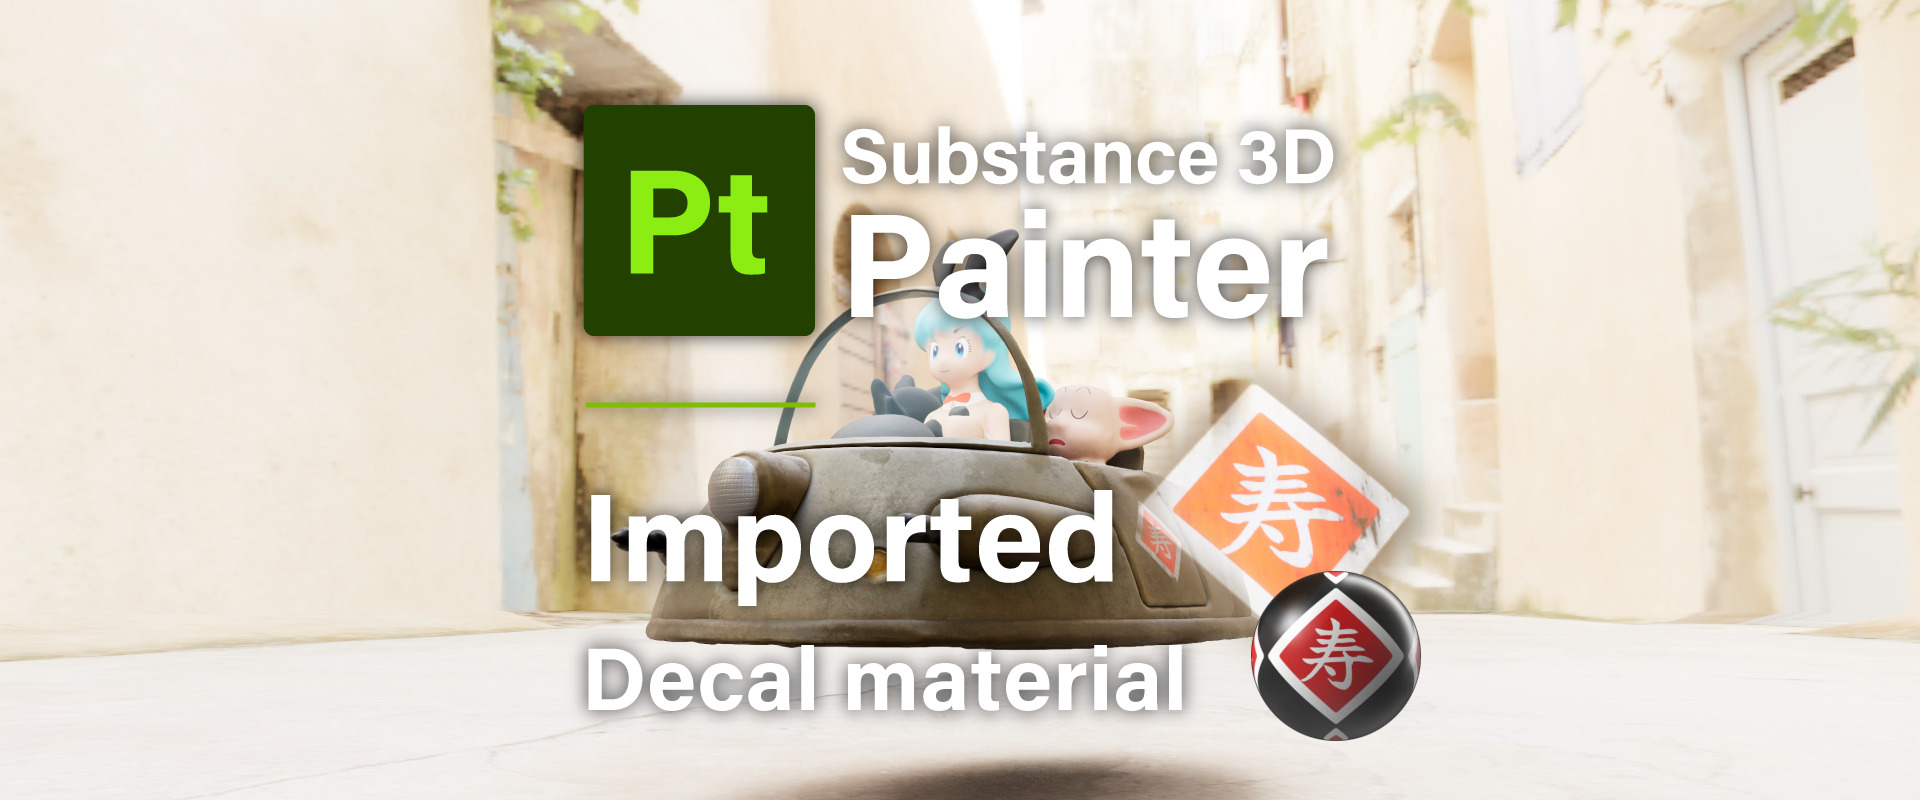 [ Substance 3D Painter ] How to set up imported materials